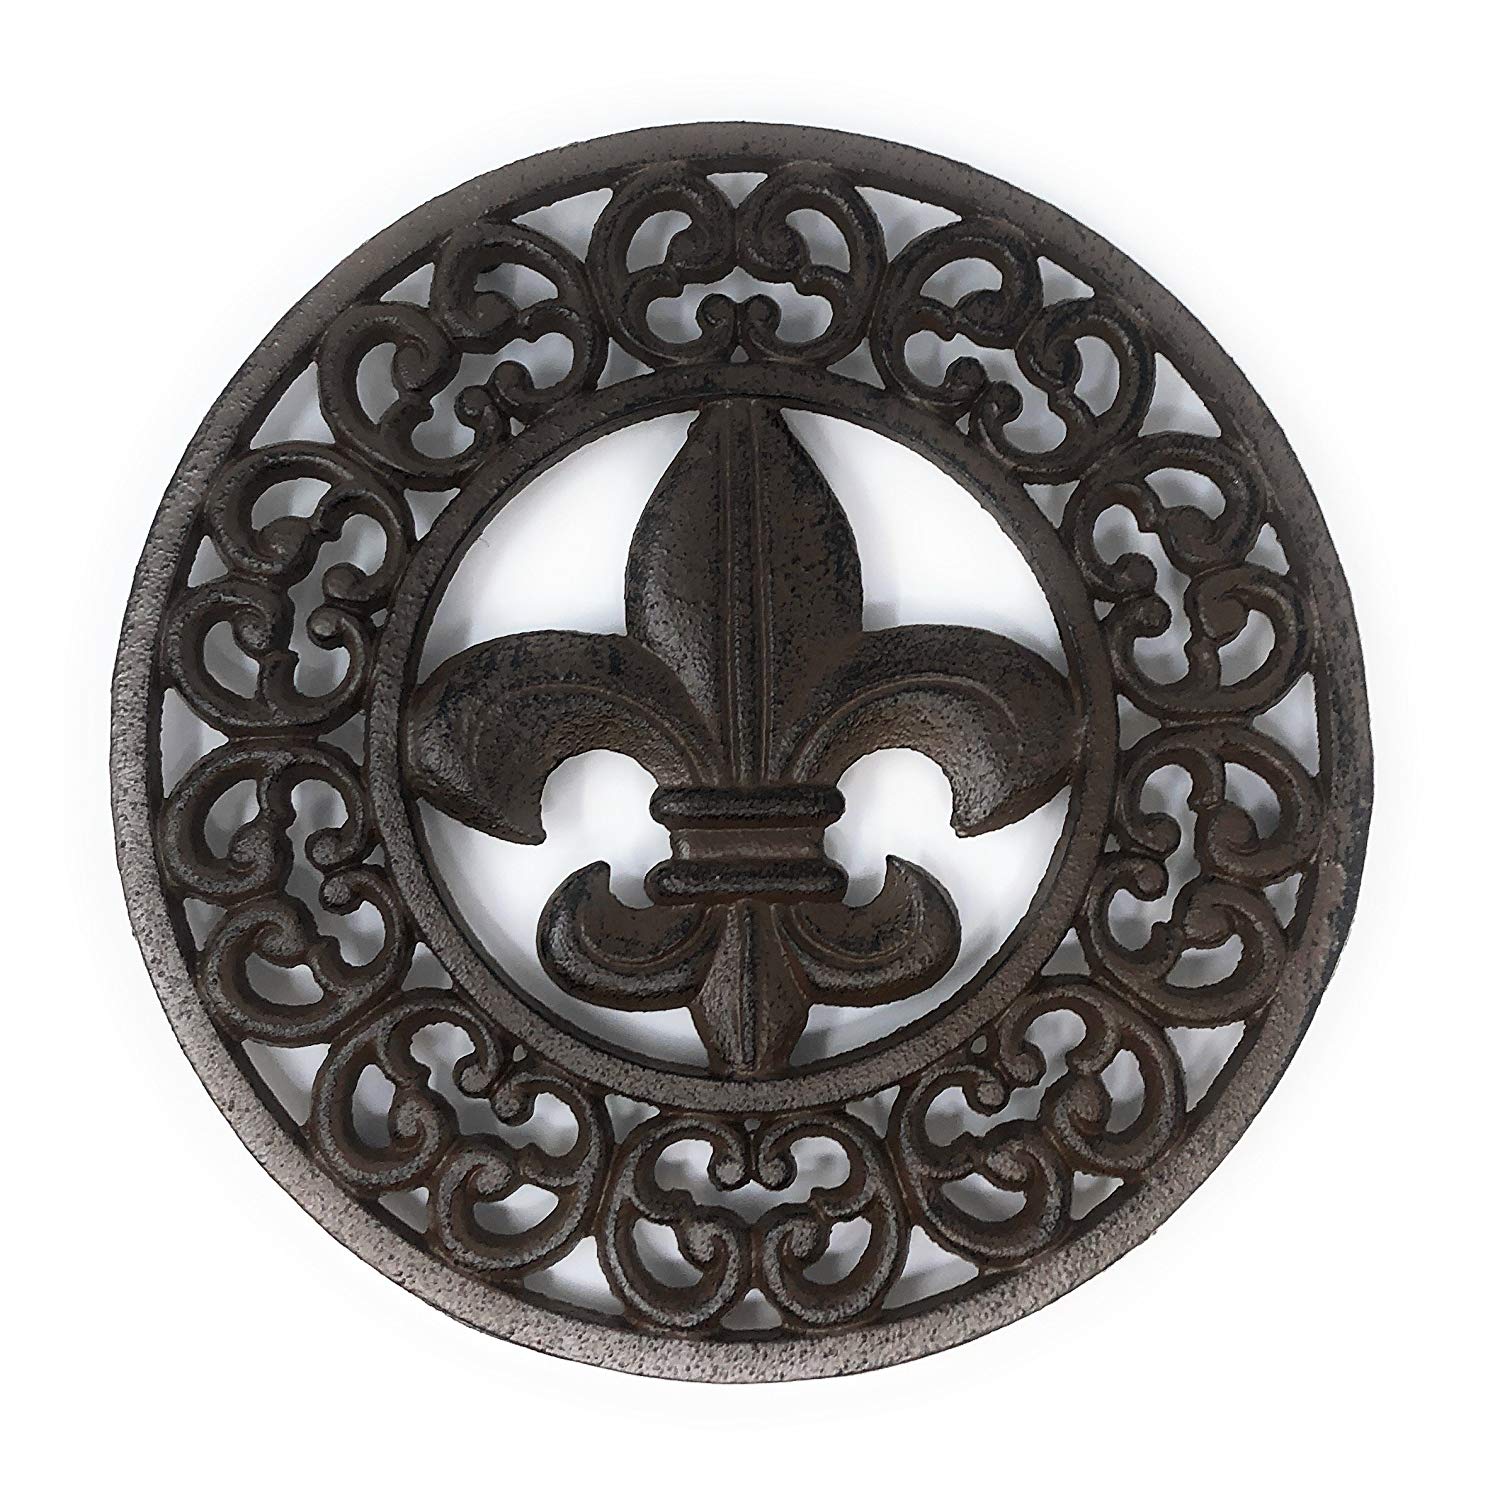 Cast Iron Fleur De Lis Trivet - Wall Hanging or Counter Top with Elegant Scroll work